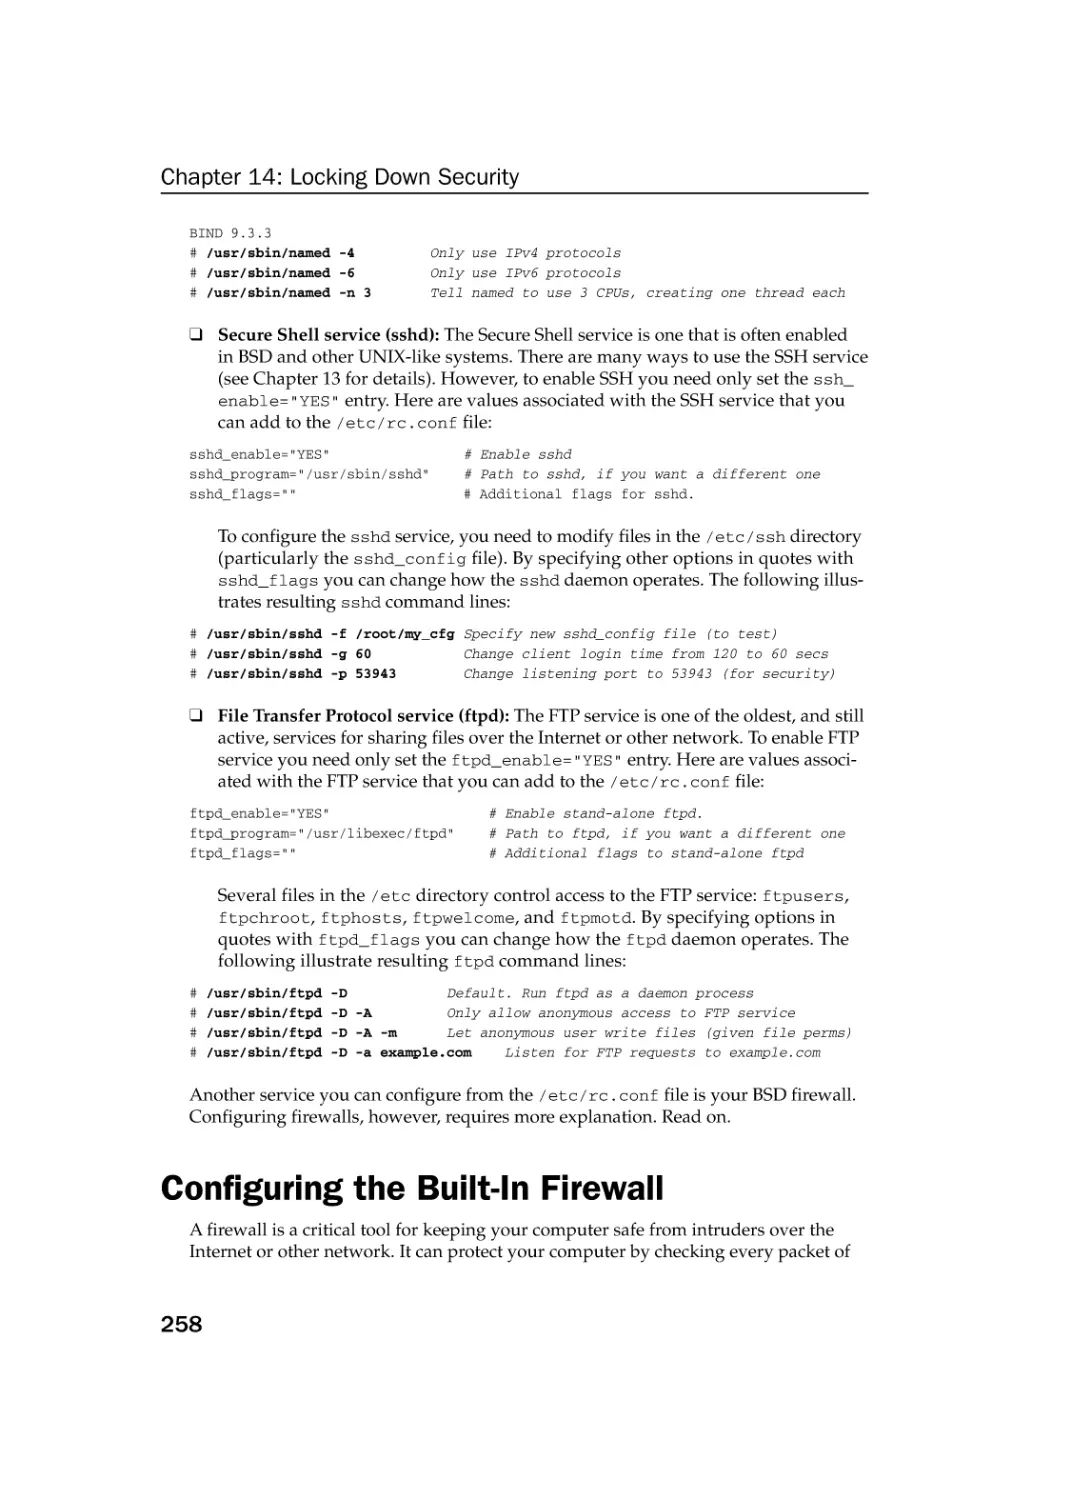 Configuring the Built-In Firewall